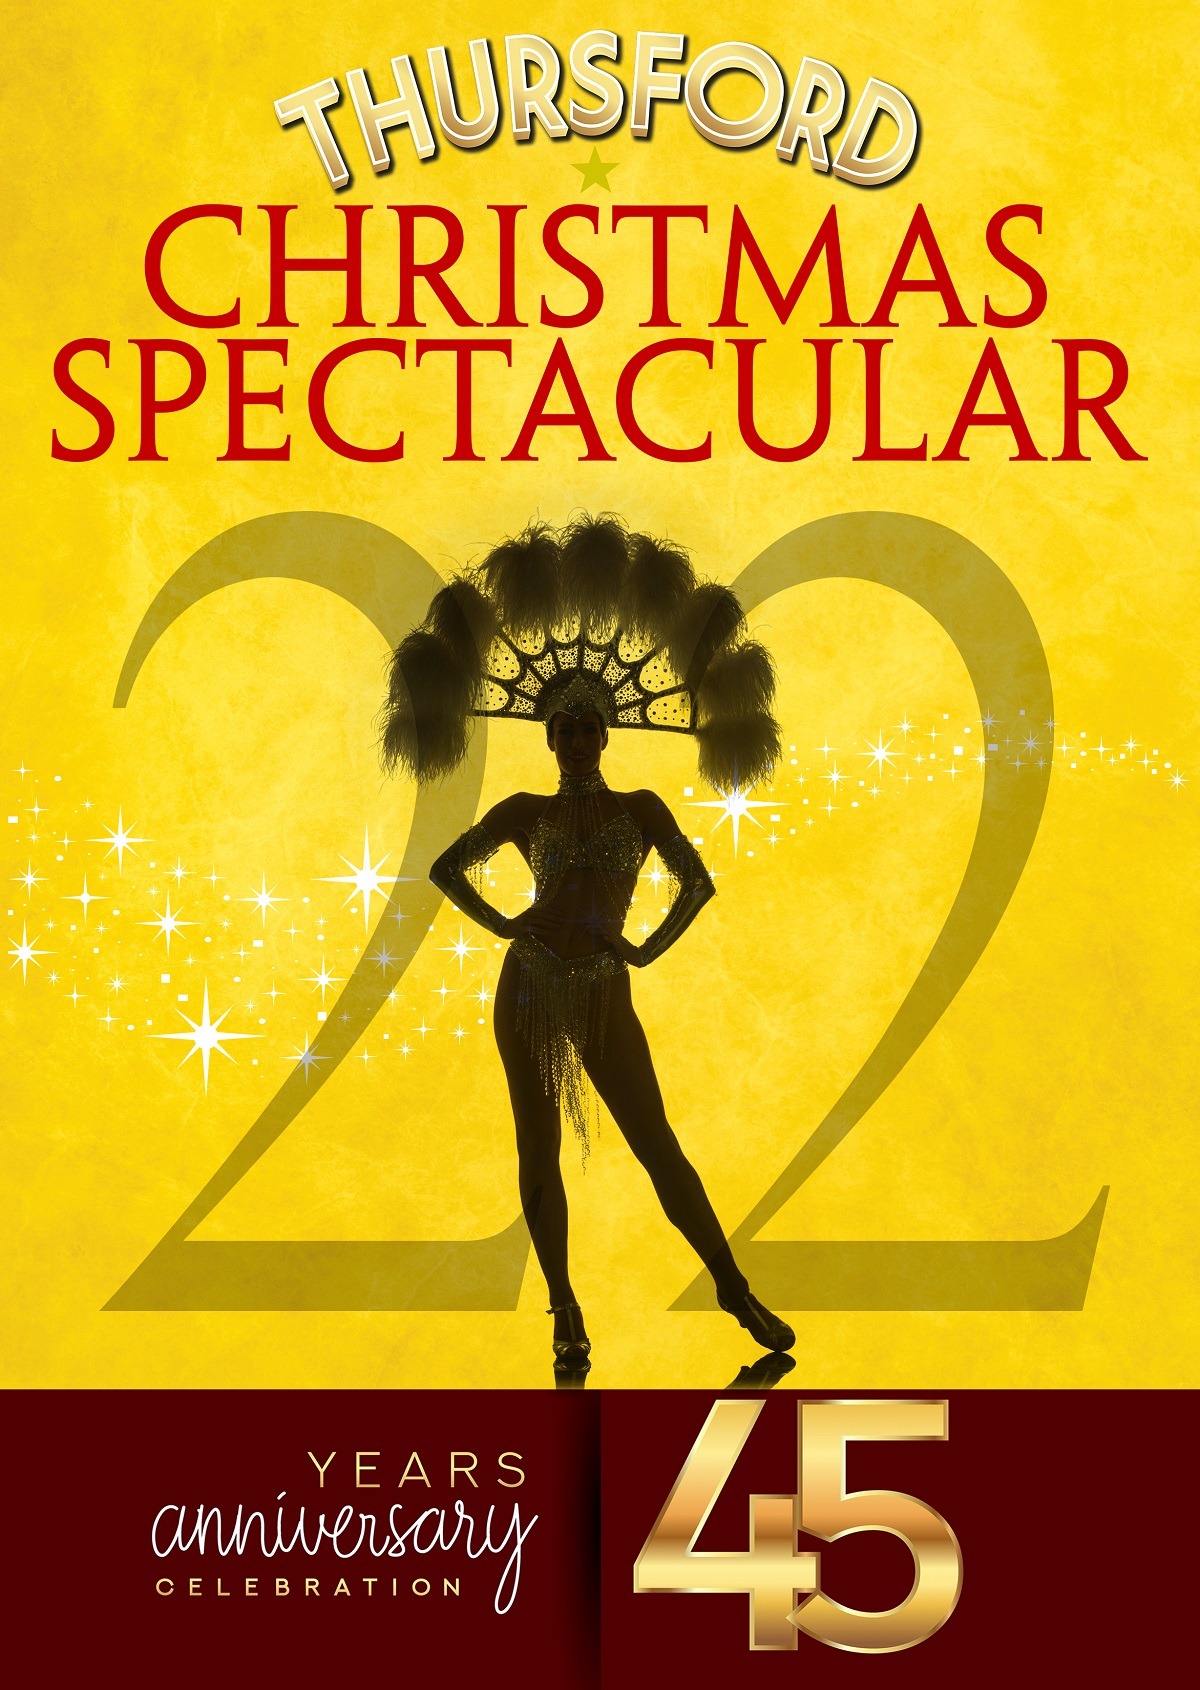 Thursford Christmas Spectacular Review